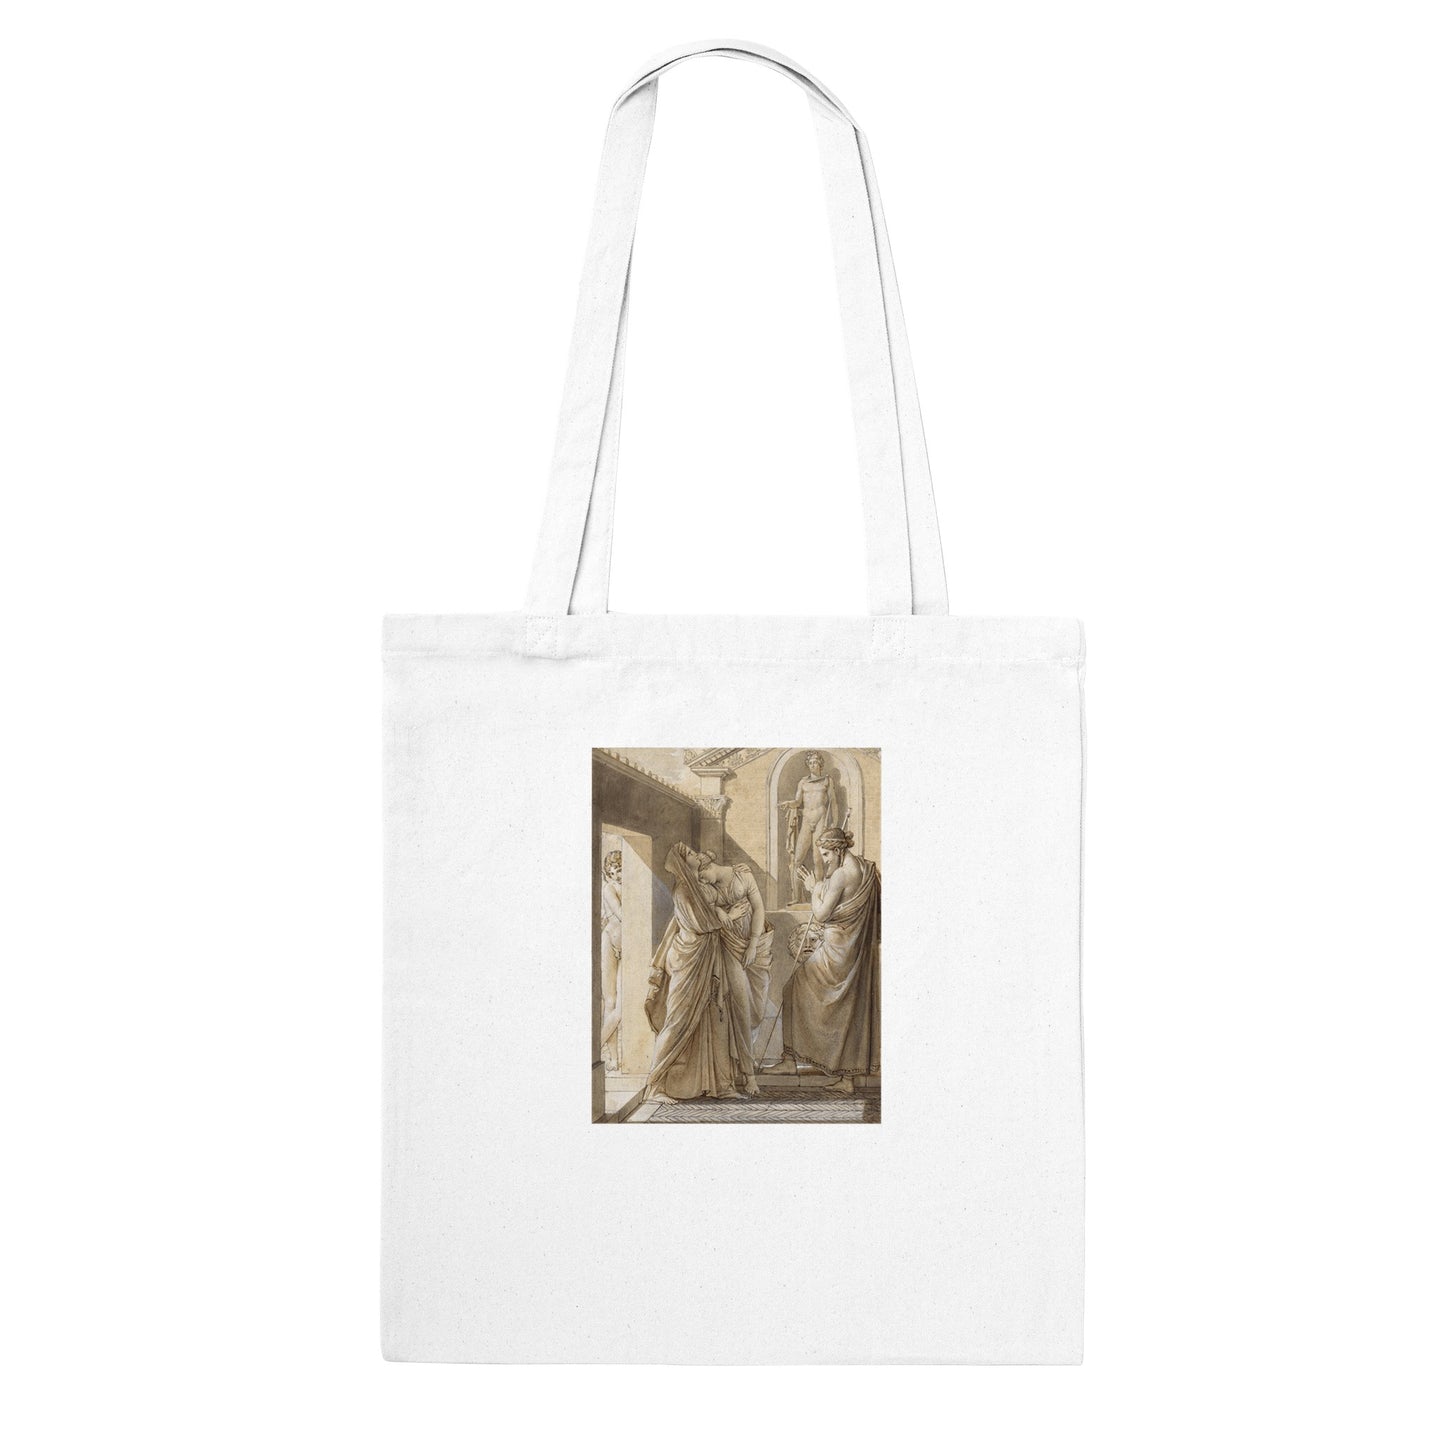 FRANCOIS GERARD - THE FATHER OF PSYCHE CONSULTING THE ORACLE OF APOLLO (1796) - CLASSIC TOTE BAG